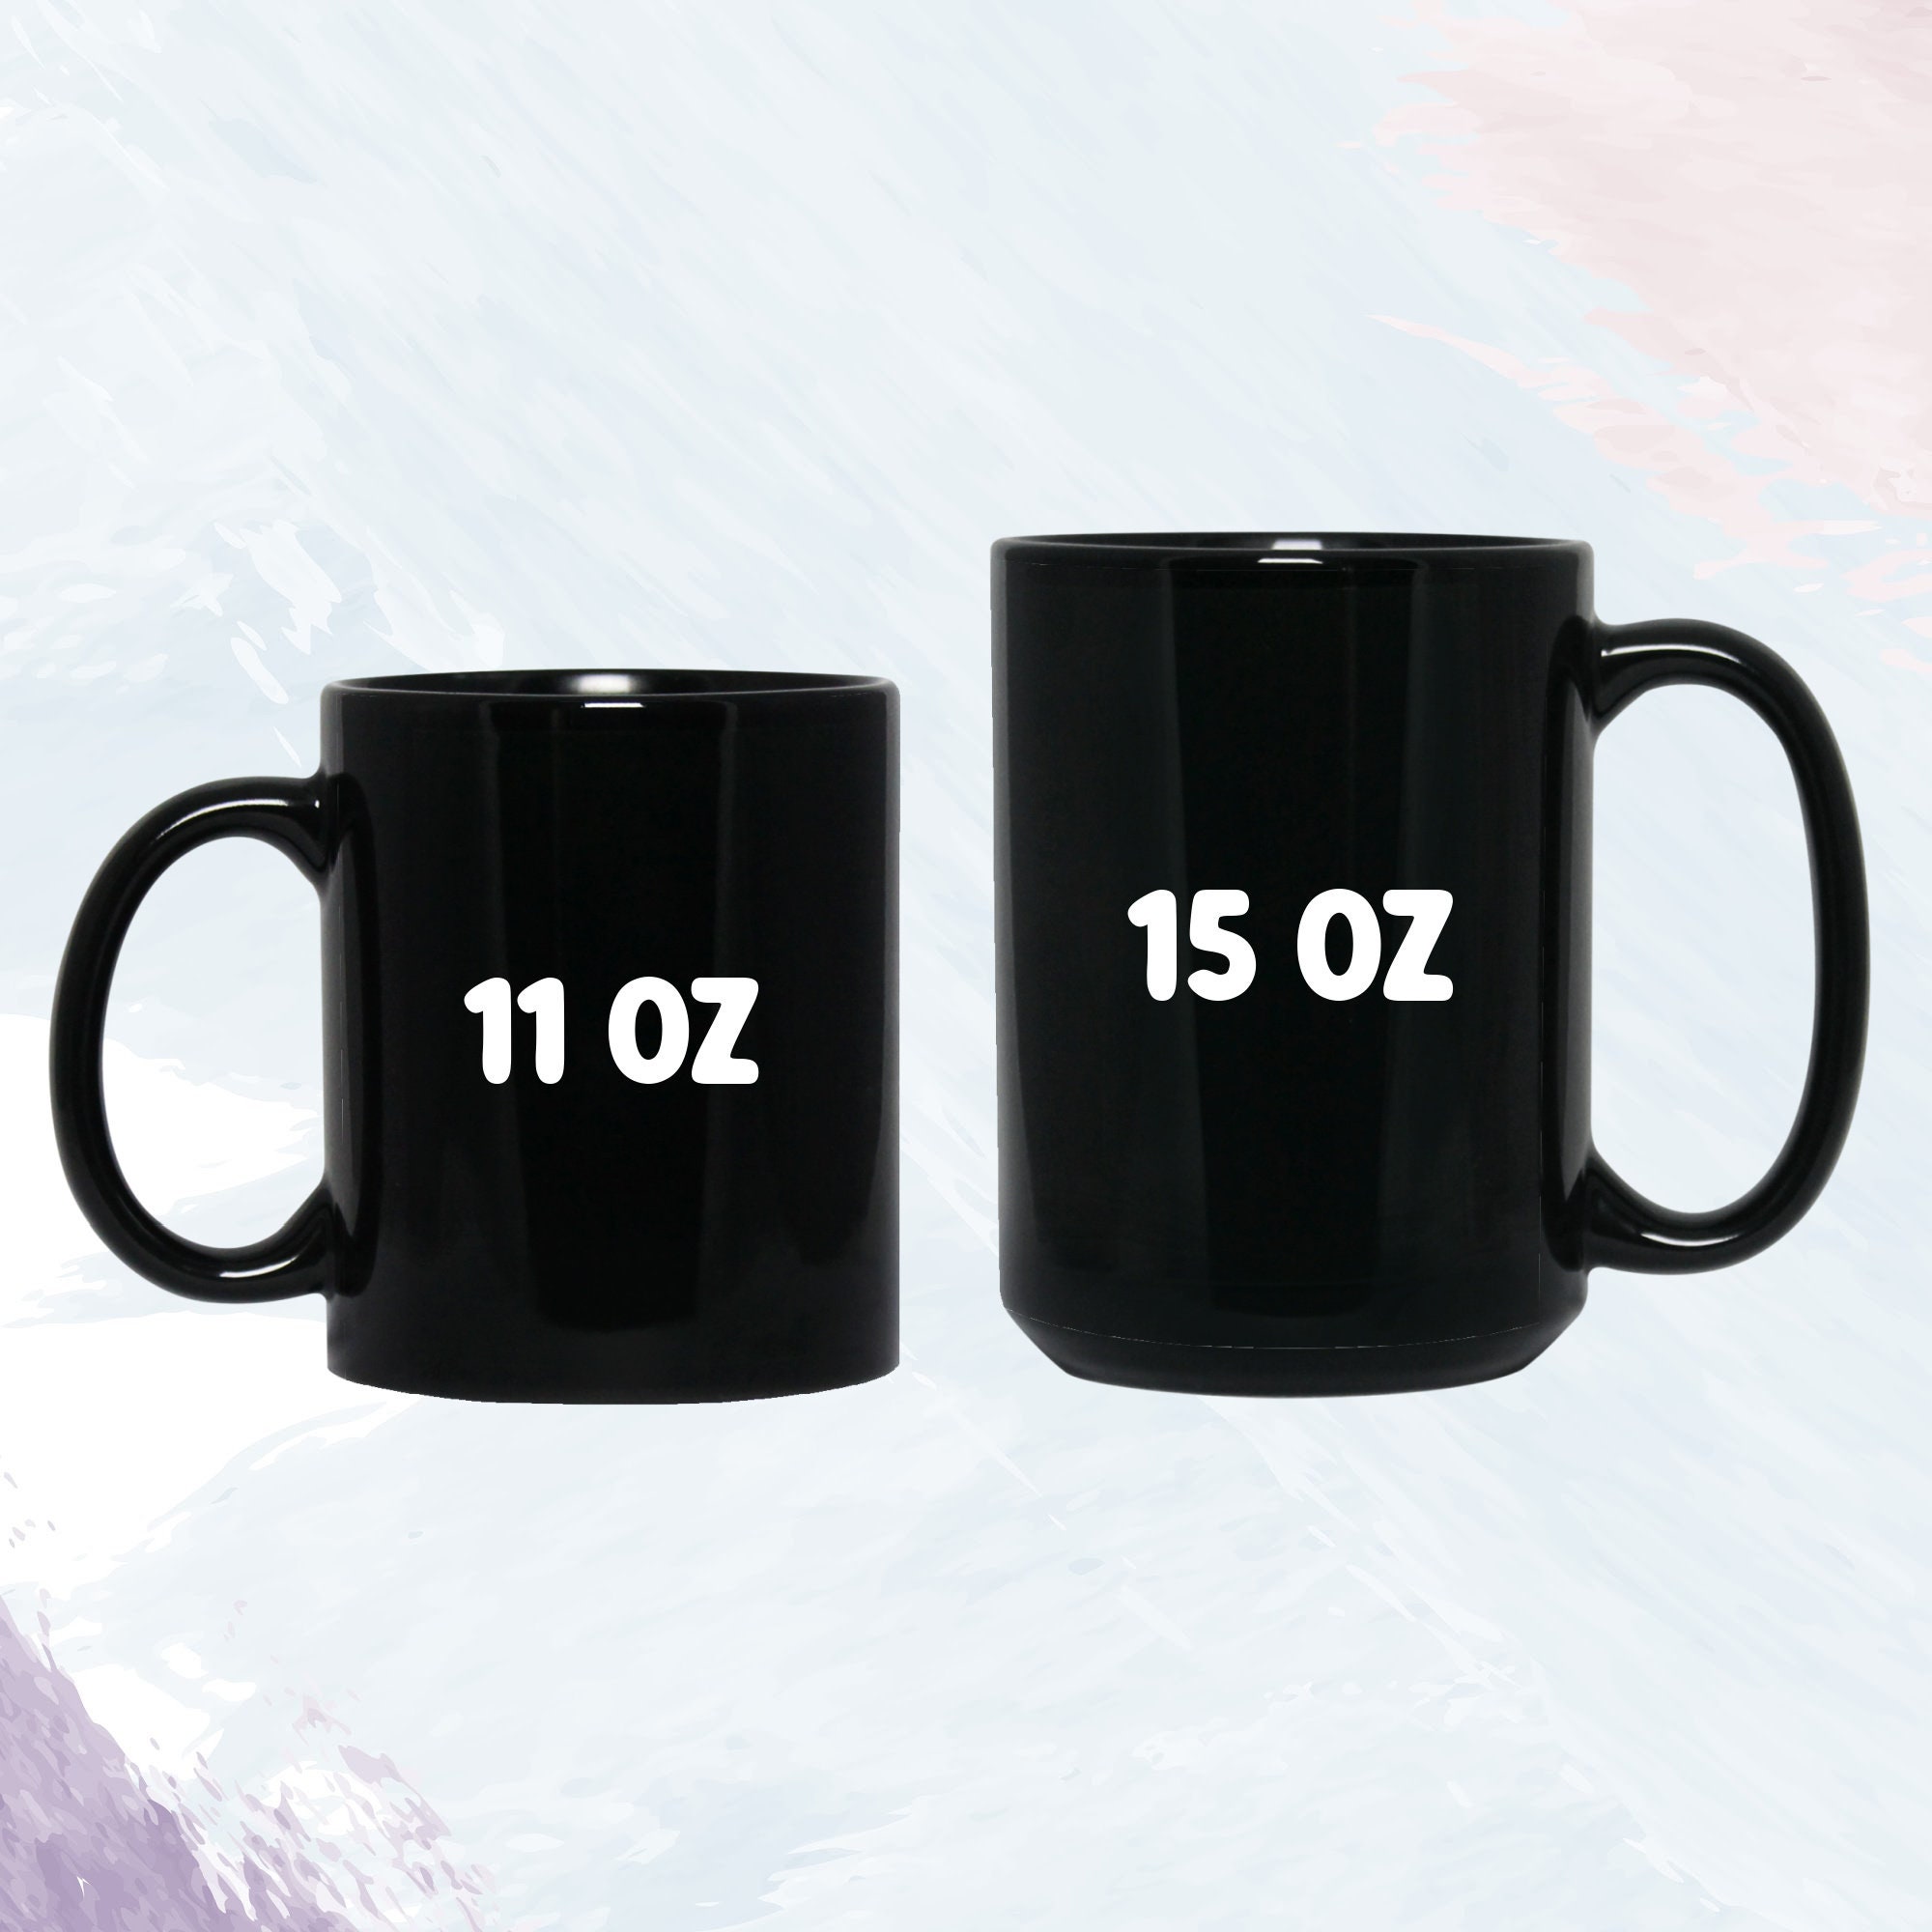 Old People Gifts, Senior People Gift, Hilarious Gag Gifts, Gift for  Grandparents, Unique Gifts, Sassy, Funny Coffee Mug, Two Tone Mug 